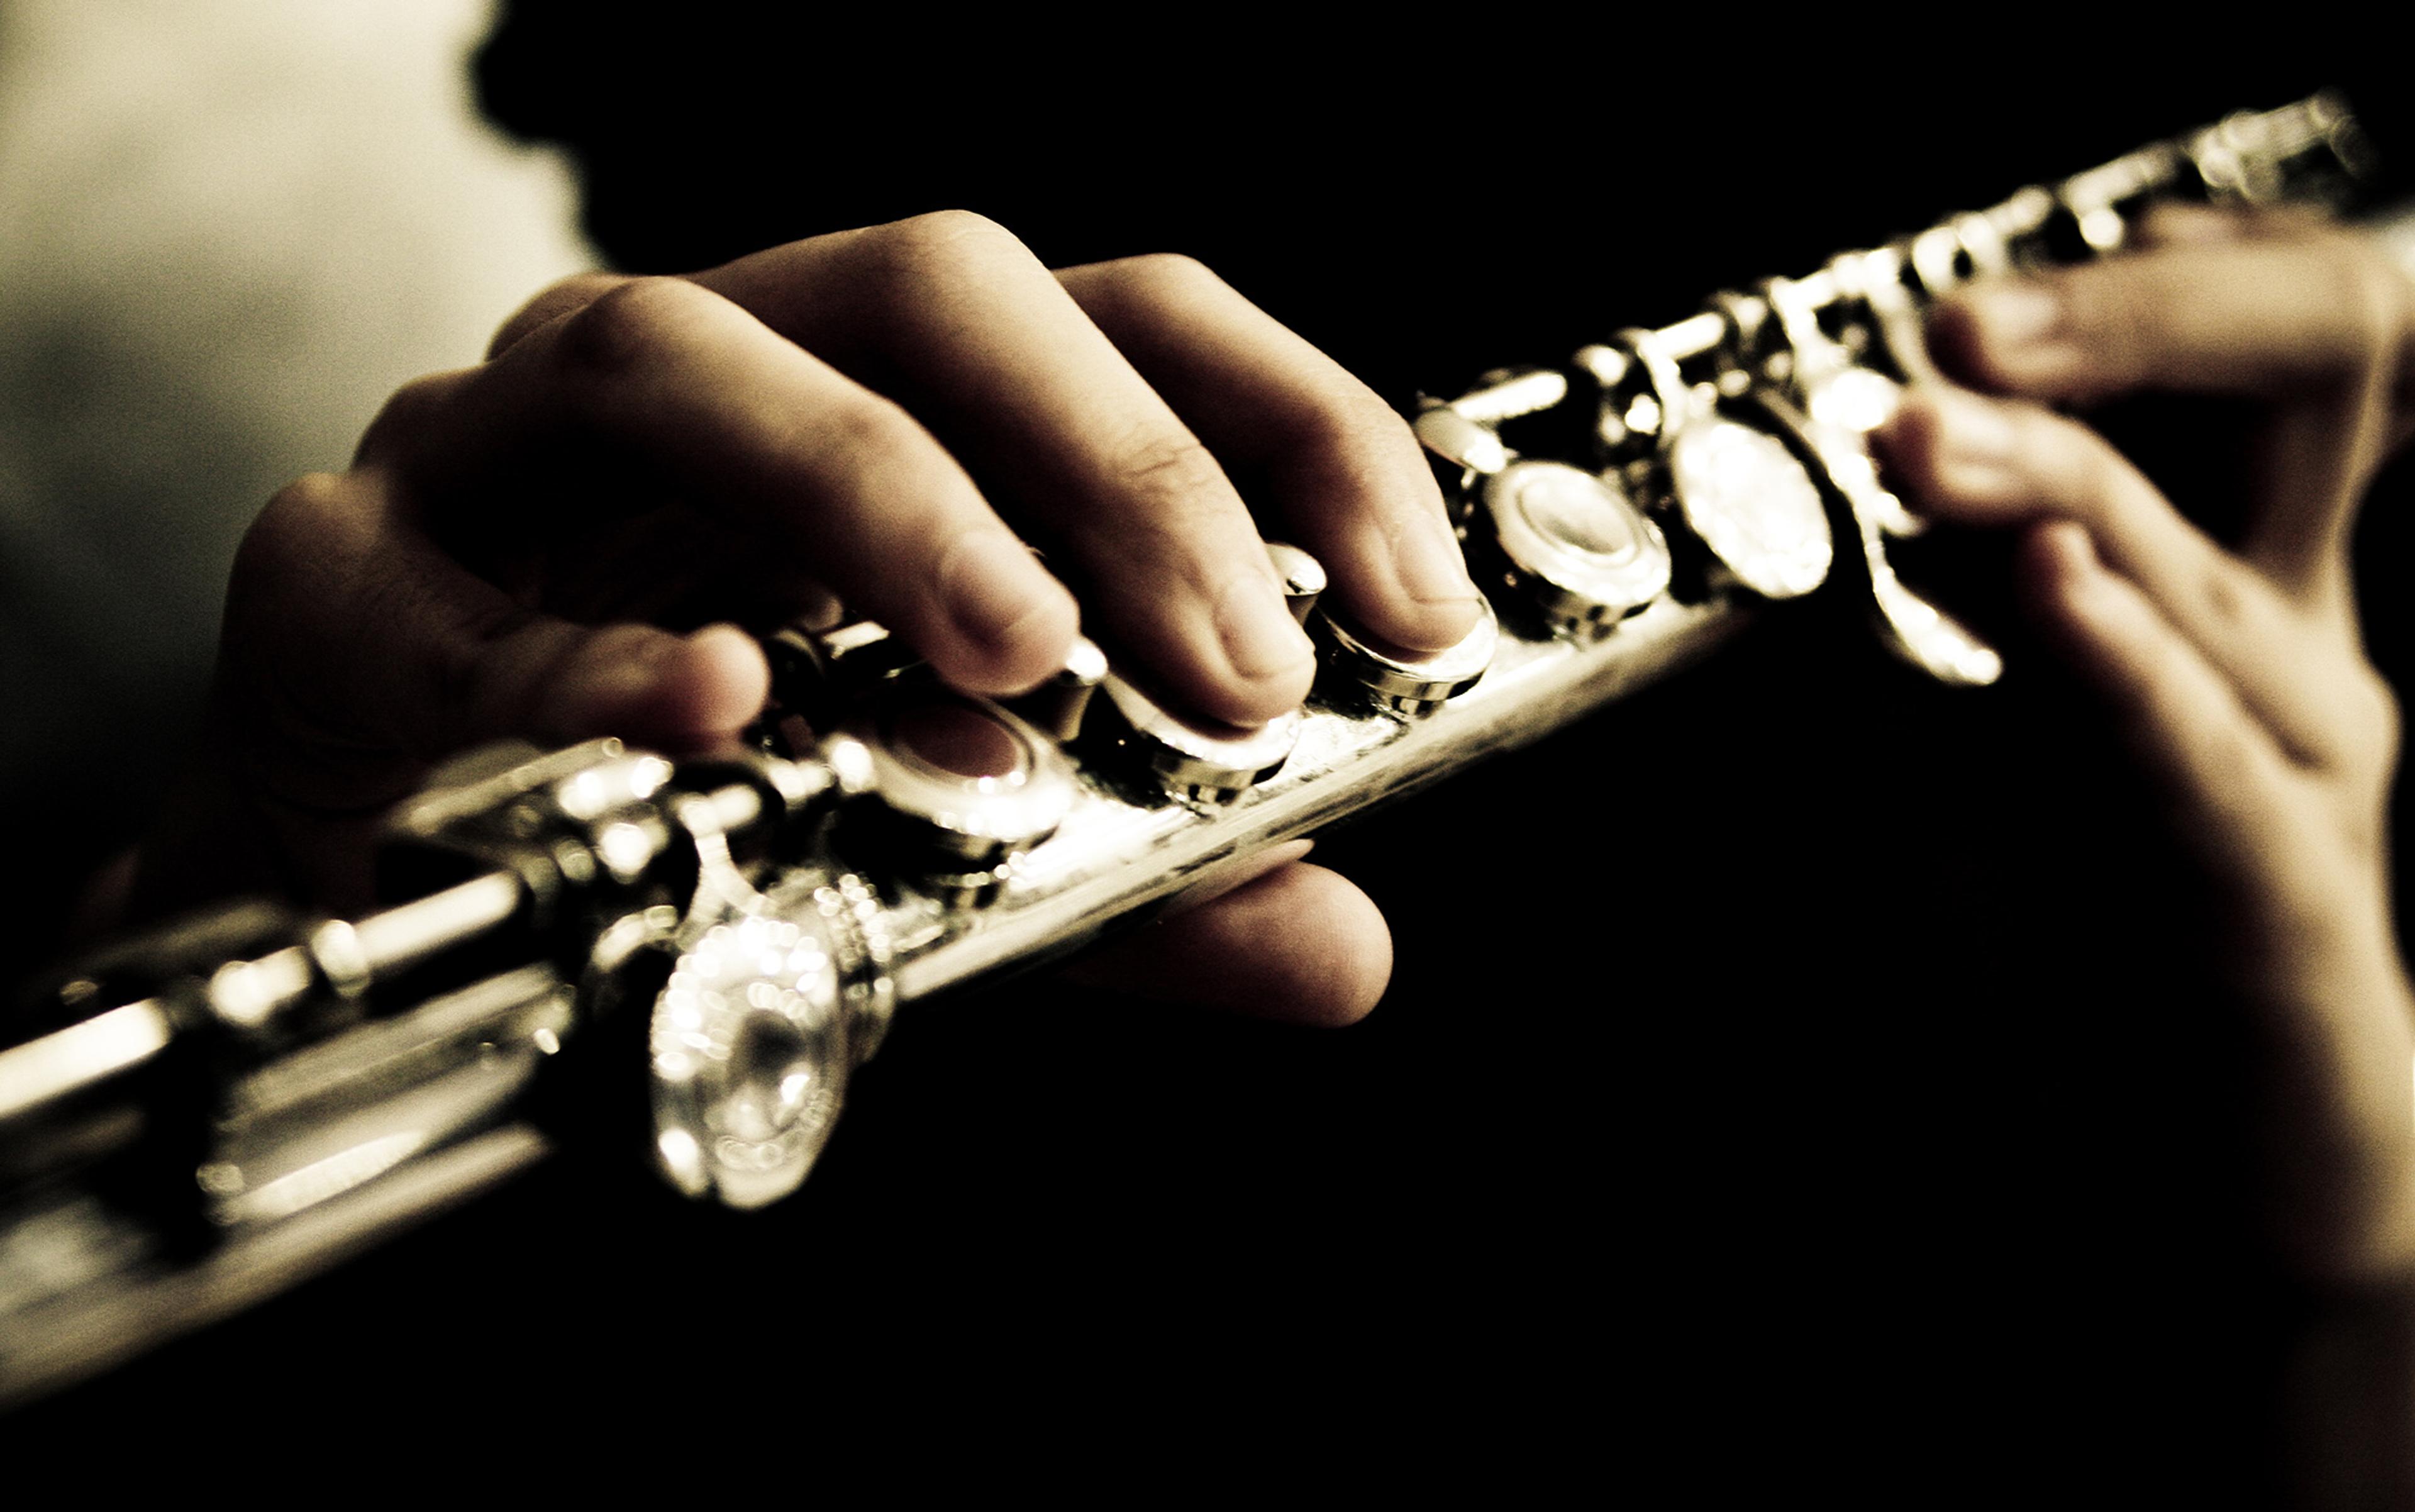 A close up picture of hands playing a silver brass flute with a shallow depth of field such that the foreground fingers and keys are more in focus